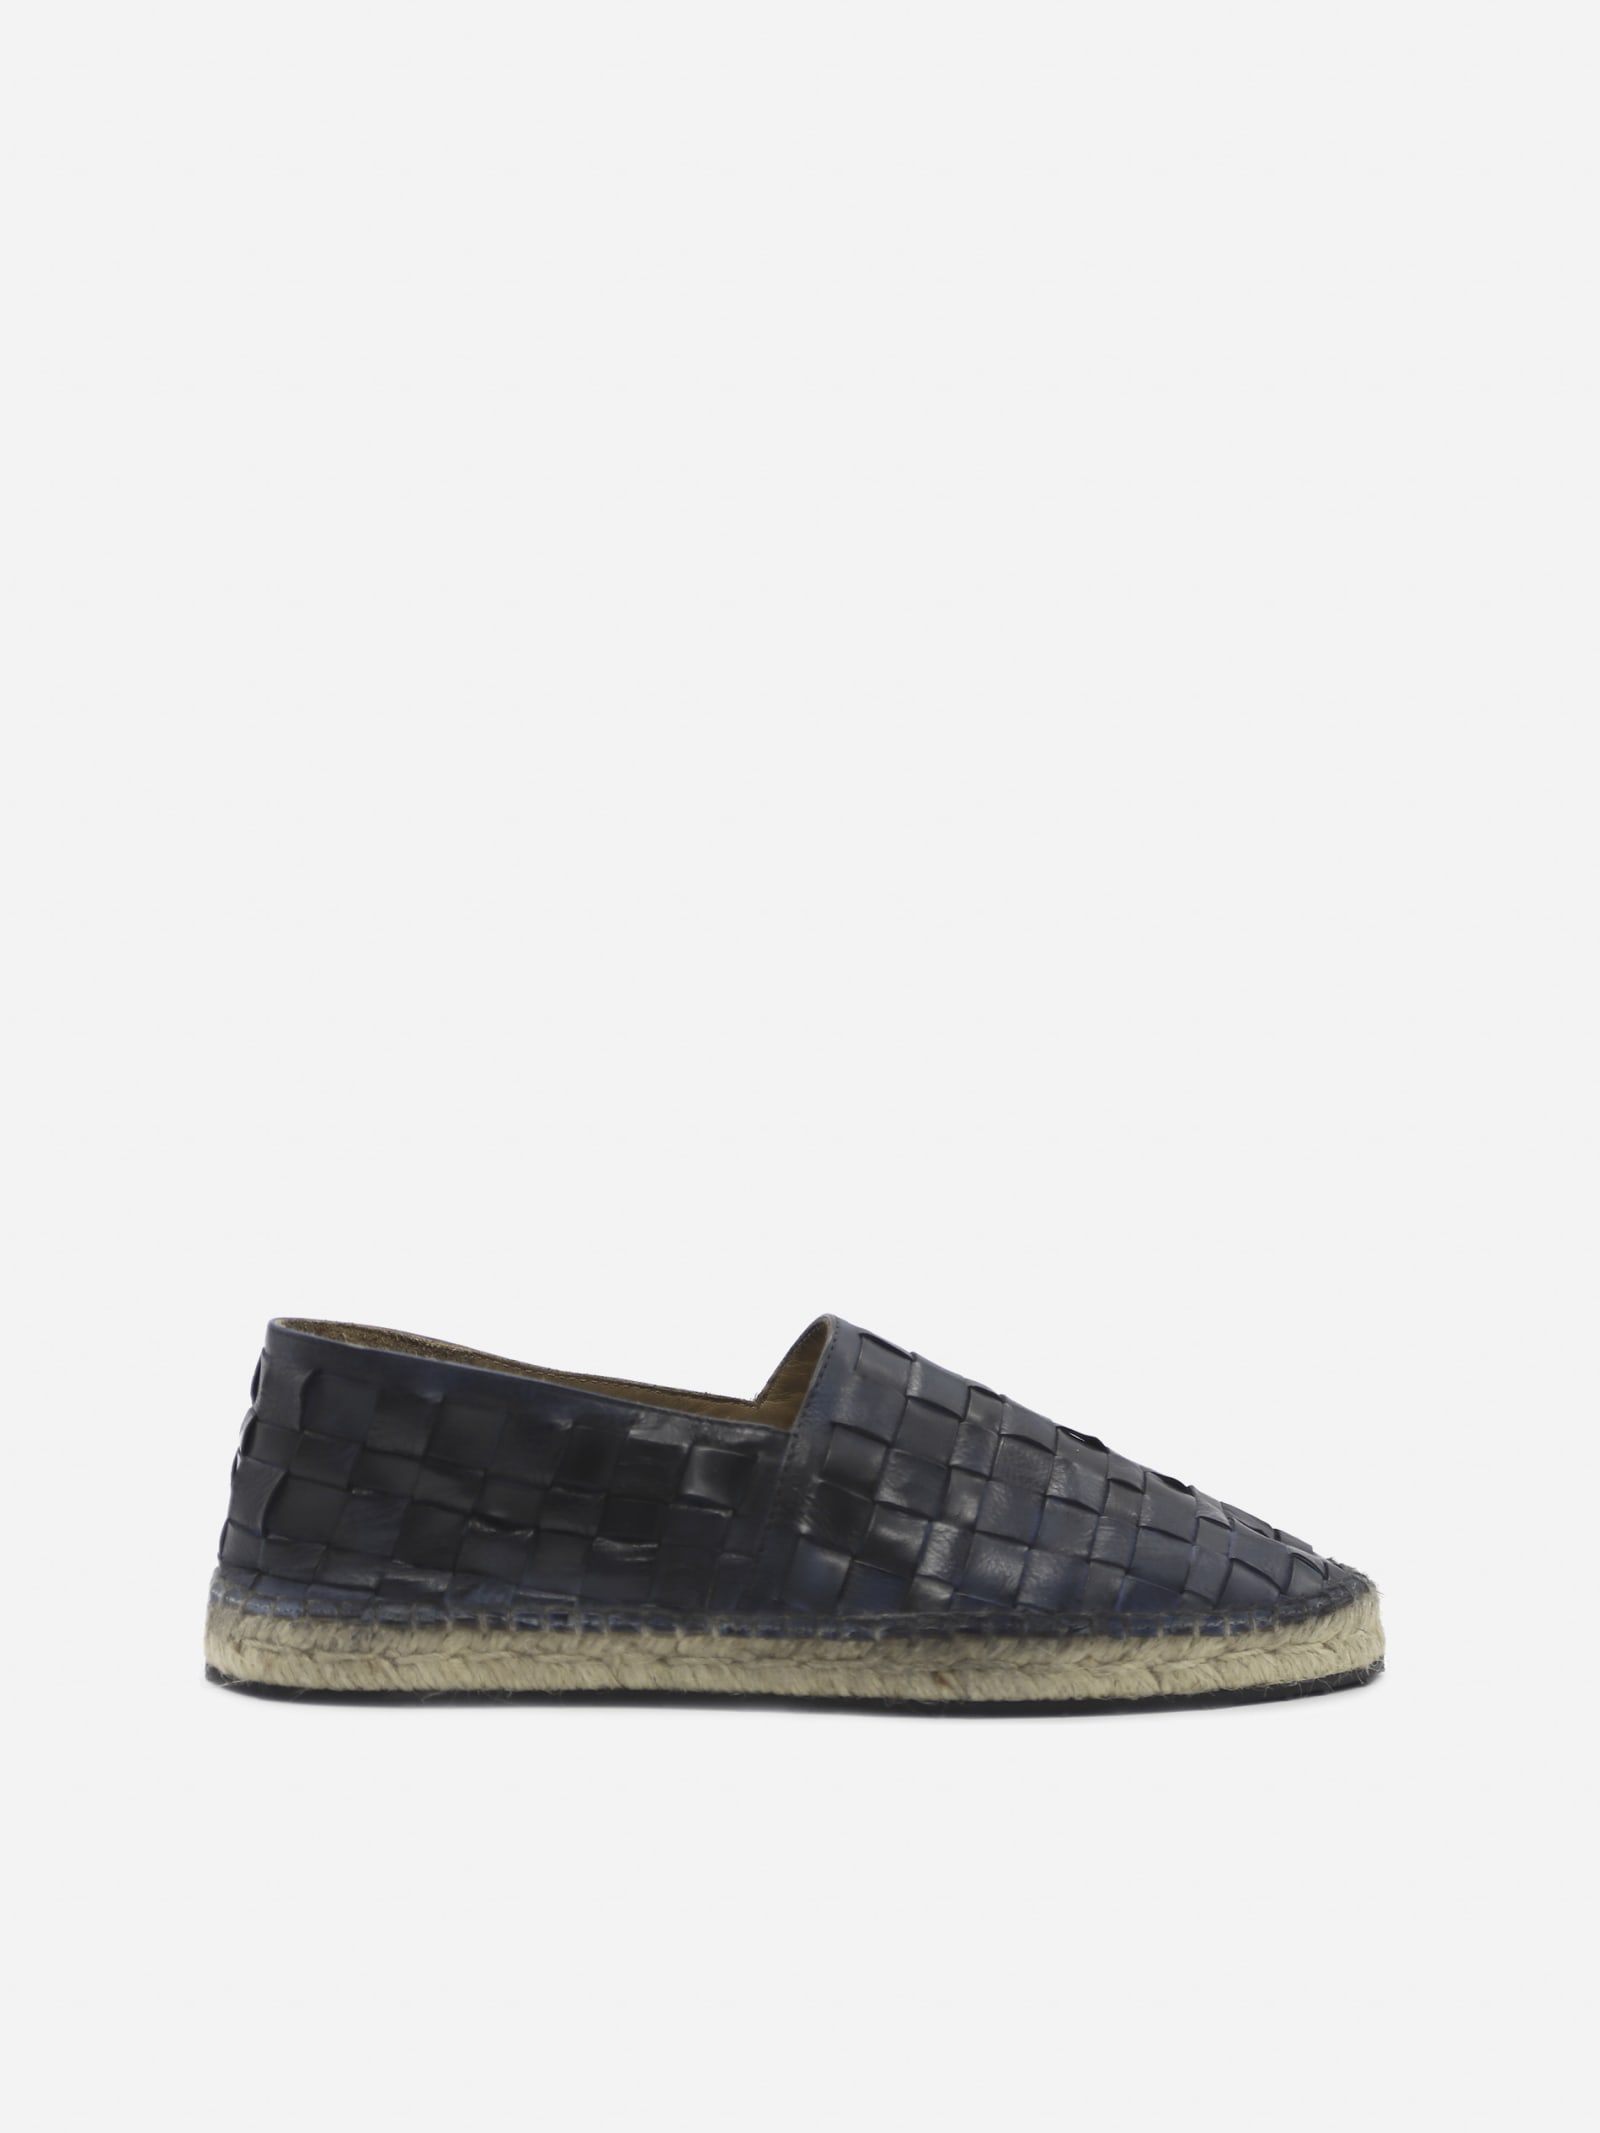 Preventi Leather Espadrilles With Woven Pattern